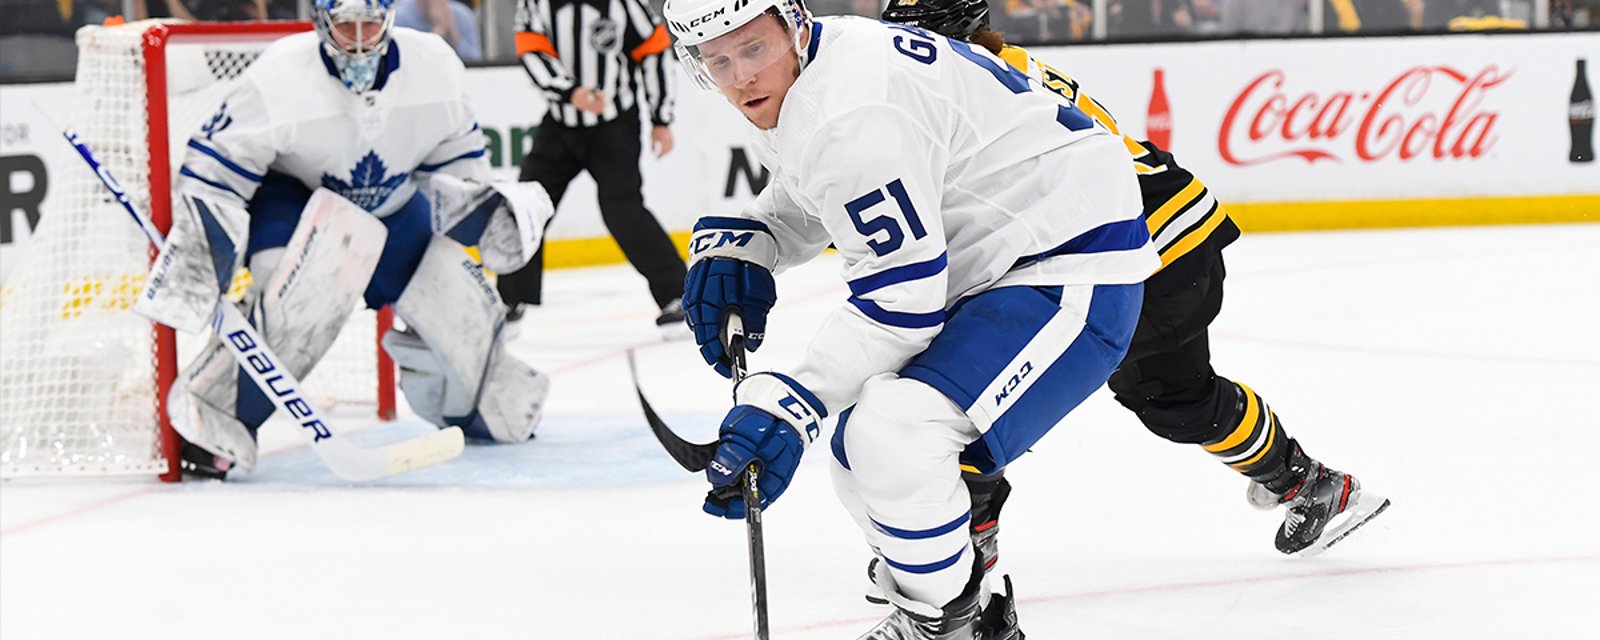 Report: Jake Gardiner has played his last game for the Leafs